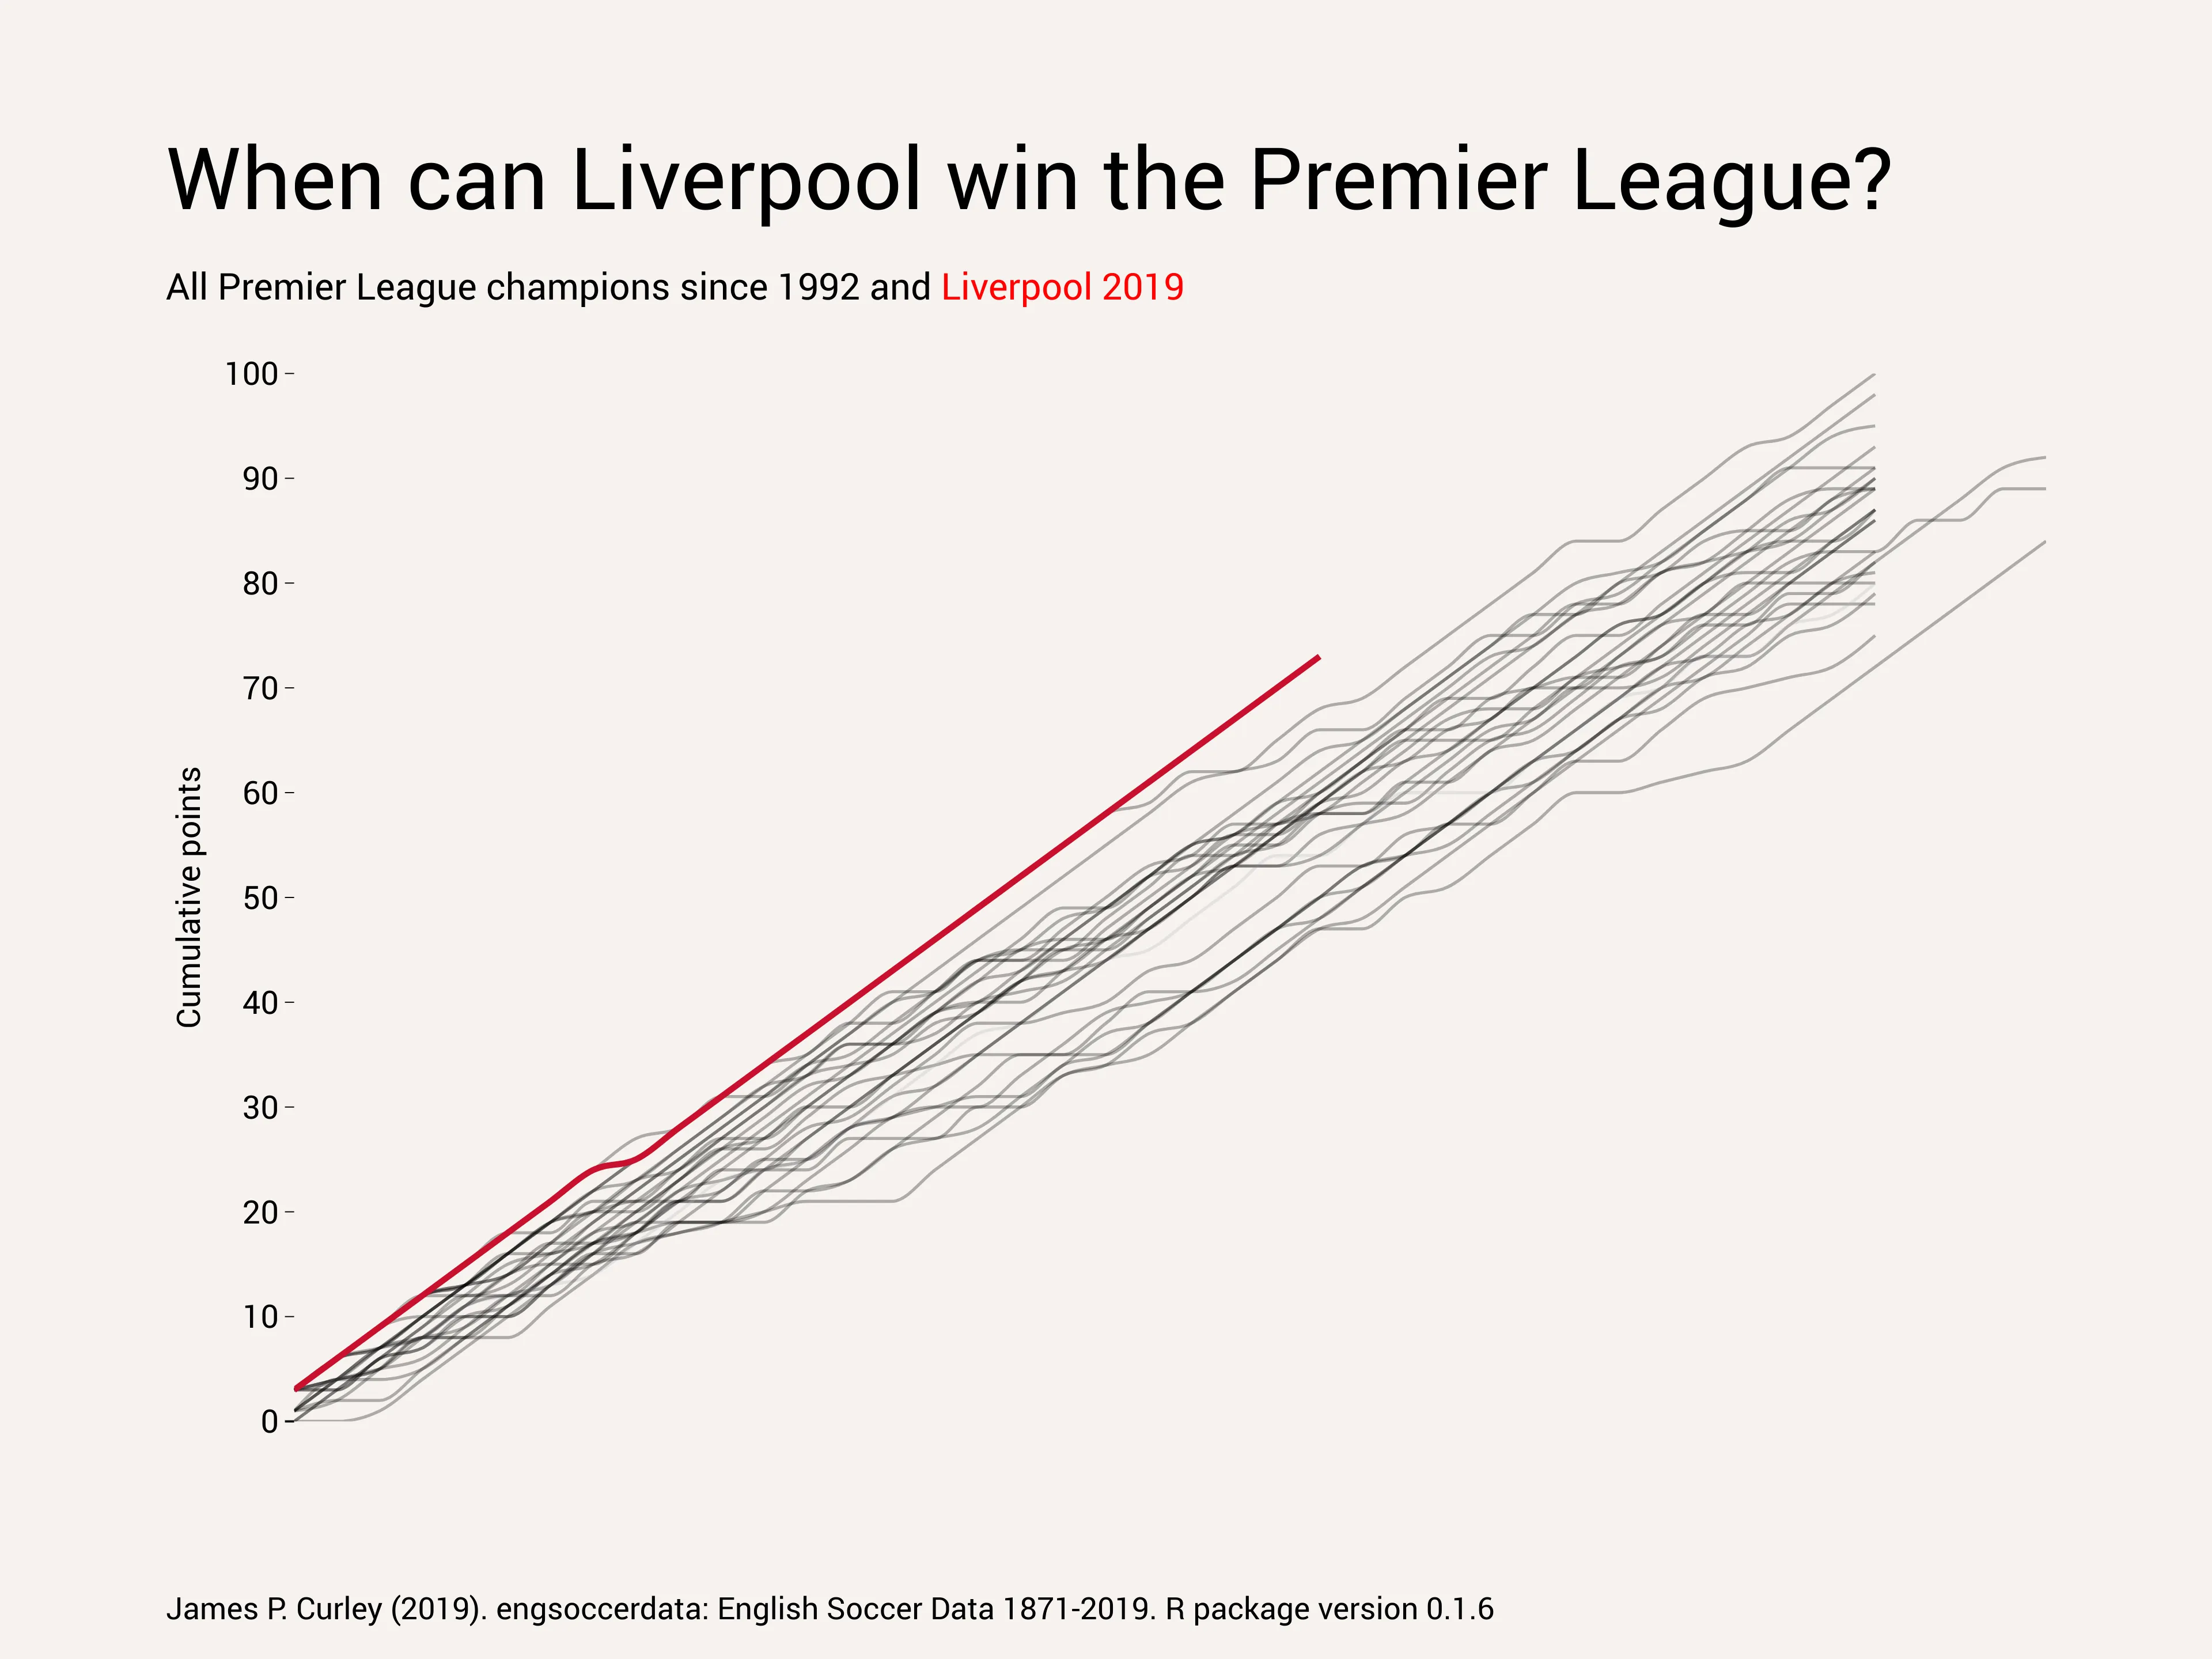 When can Liverpool win the Premier League?